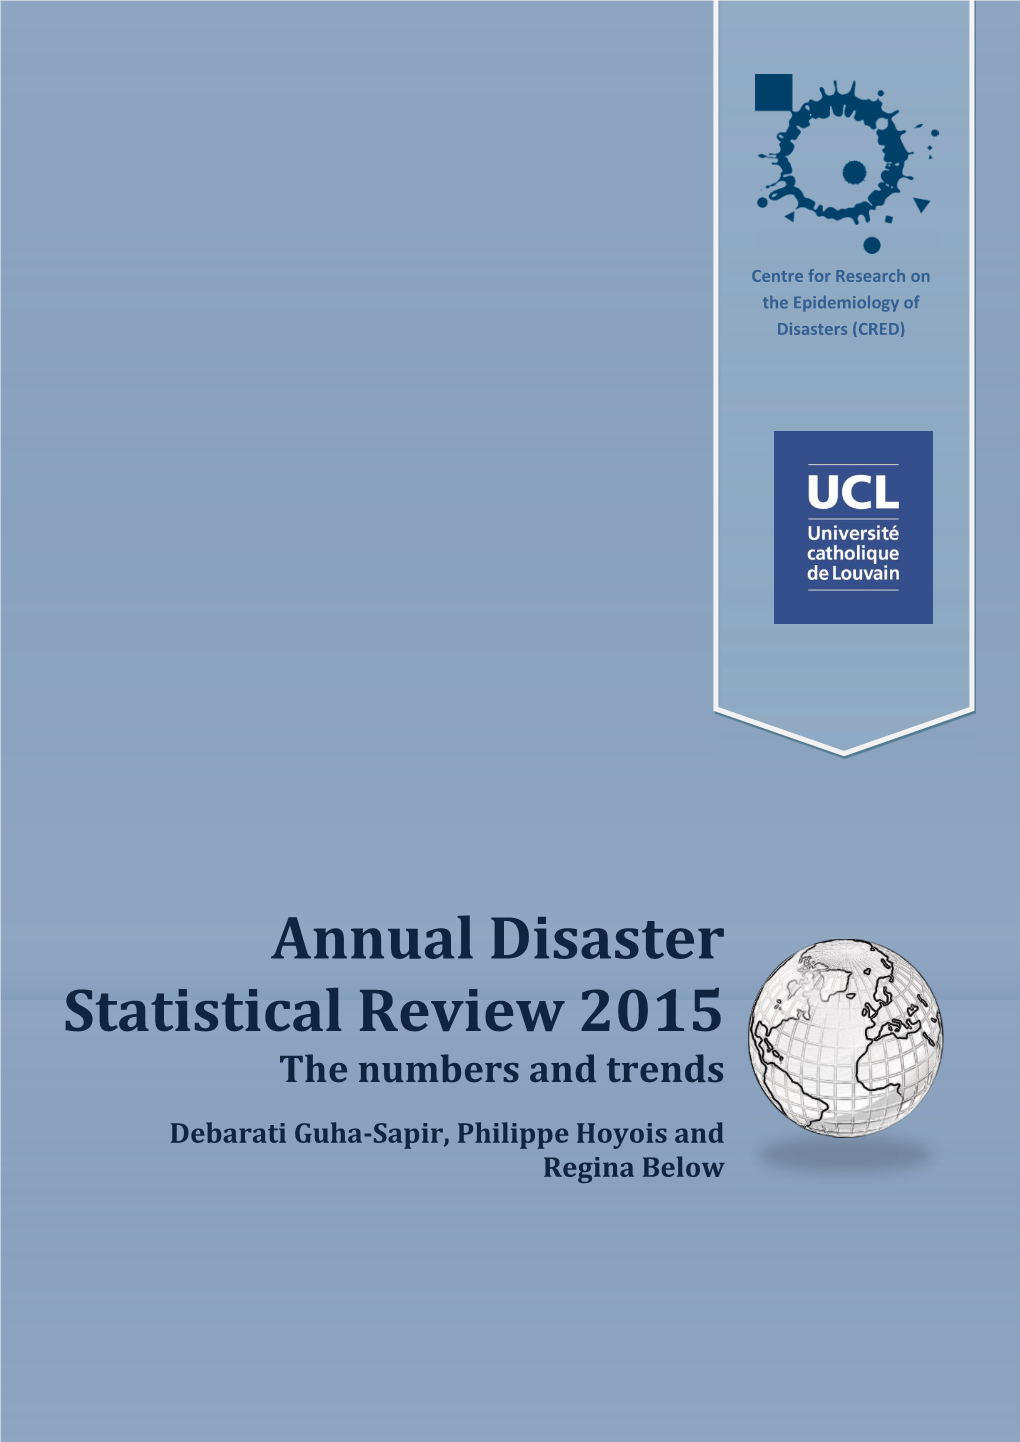 Annual Disaster Statistical Review 2015 – the Numbers and Trends